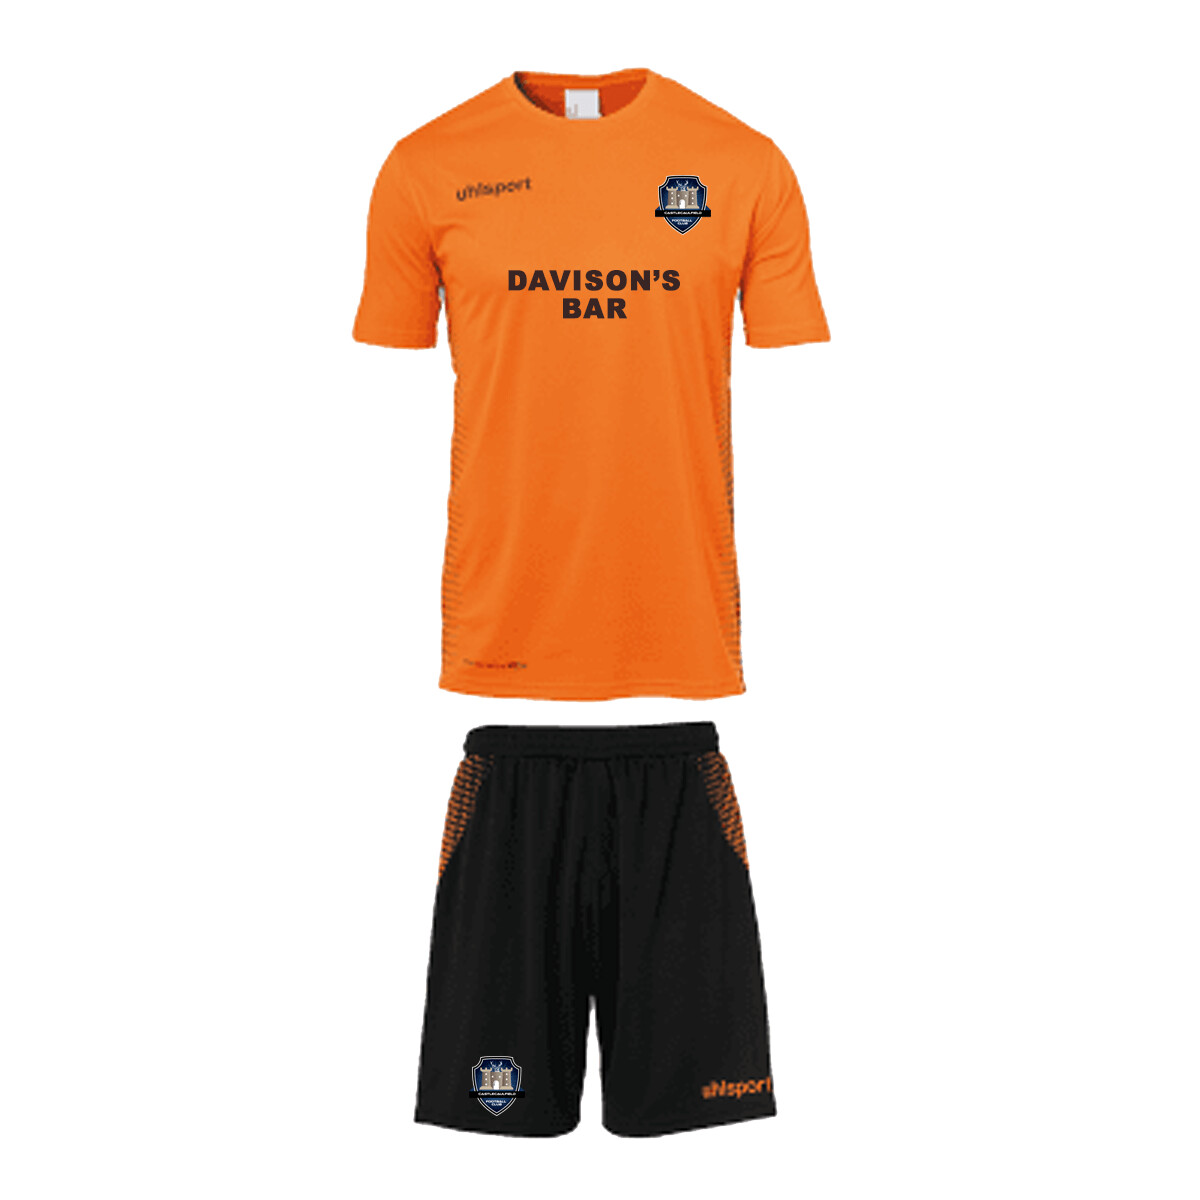 Official Castlecaulfield FC Orange Top and Black Shorts